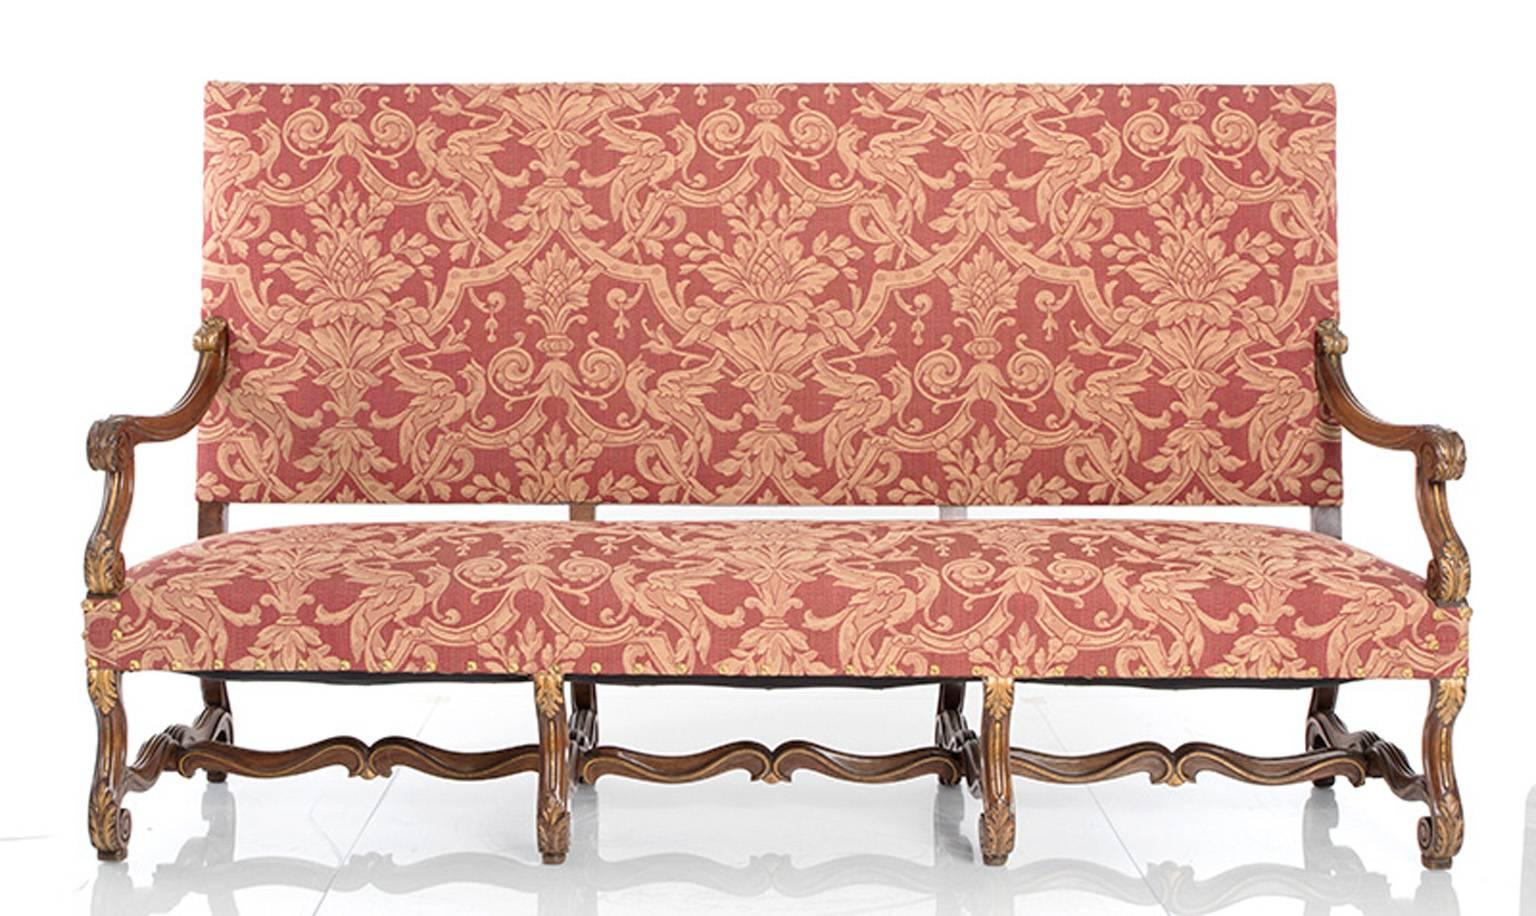 20th century Jacobean style settee. There are eight legs, elements of which are gilded. The settee is upholstered in a red and gold damask type fabric.
  